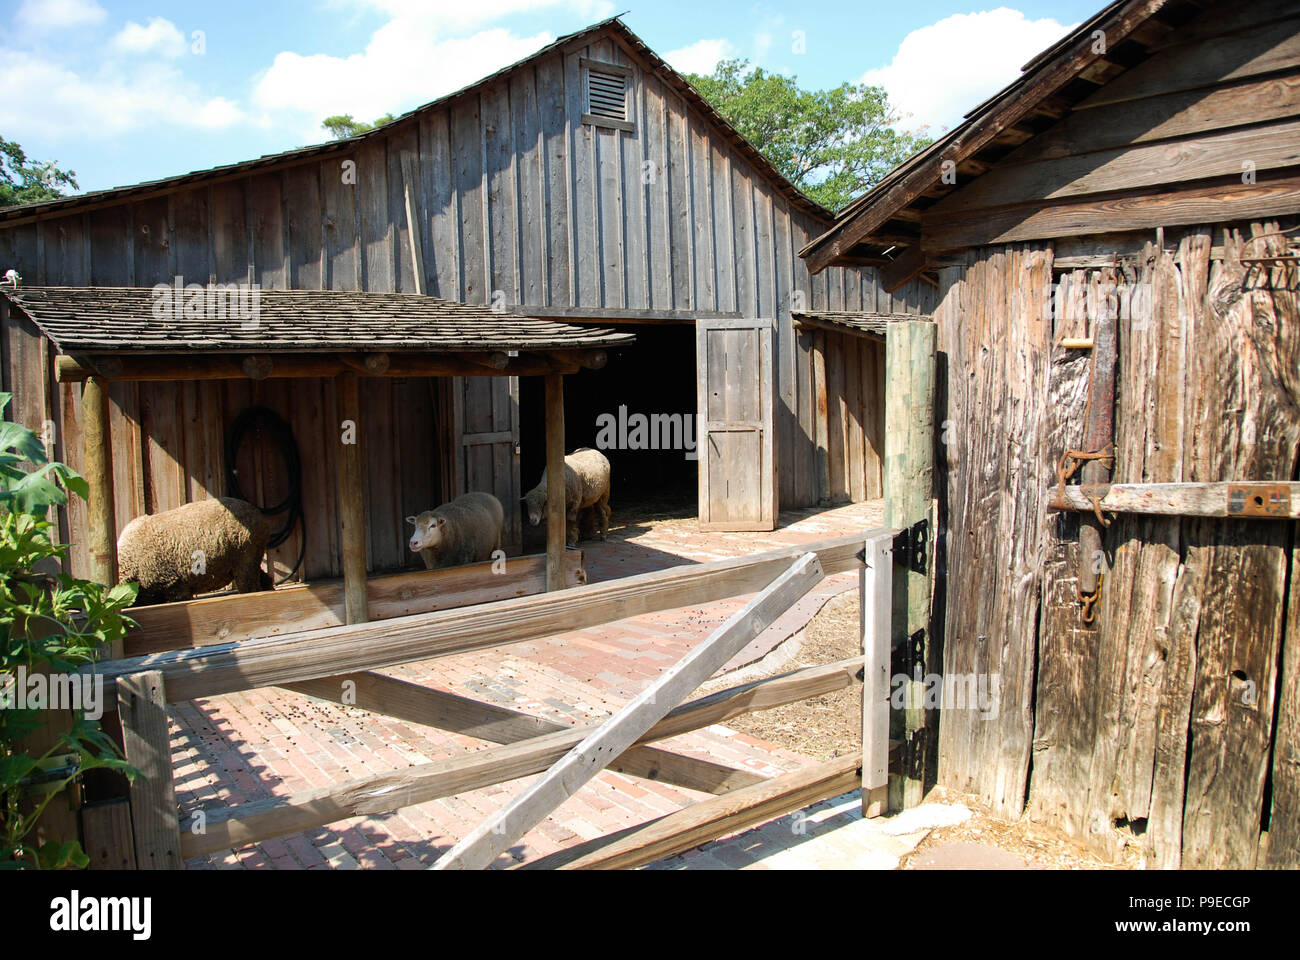 Sheep in wooden farm buildings at the Dallas Heritage Village, a museum near the city centre. Stock Photo